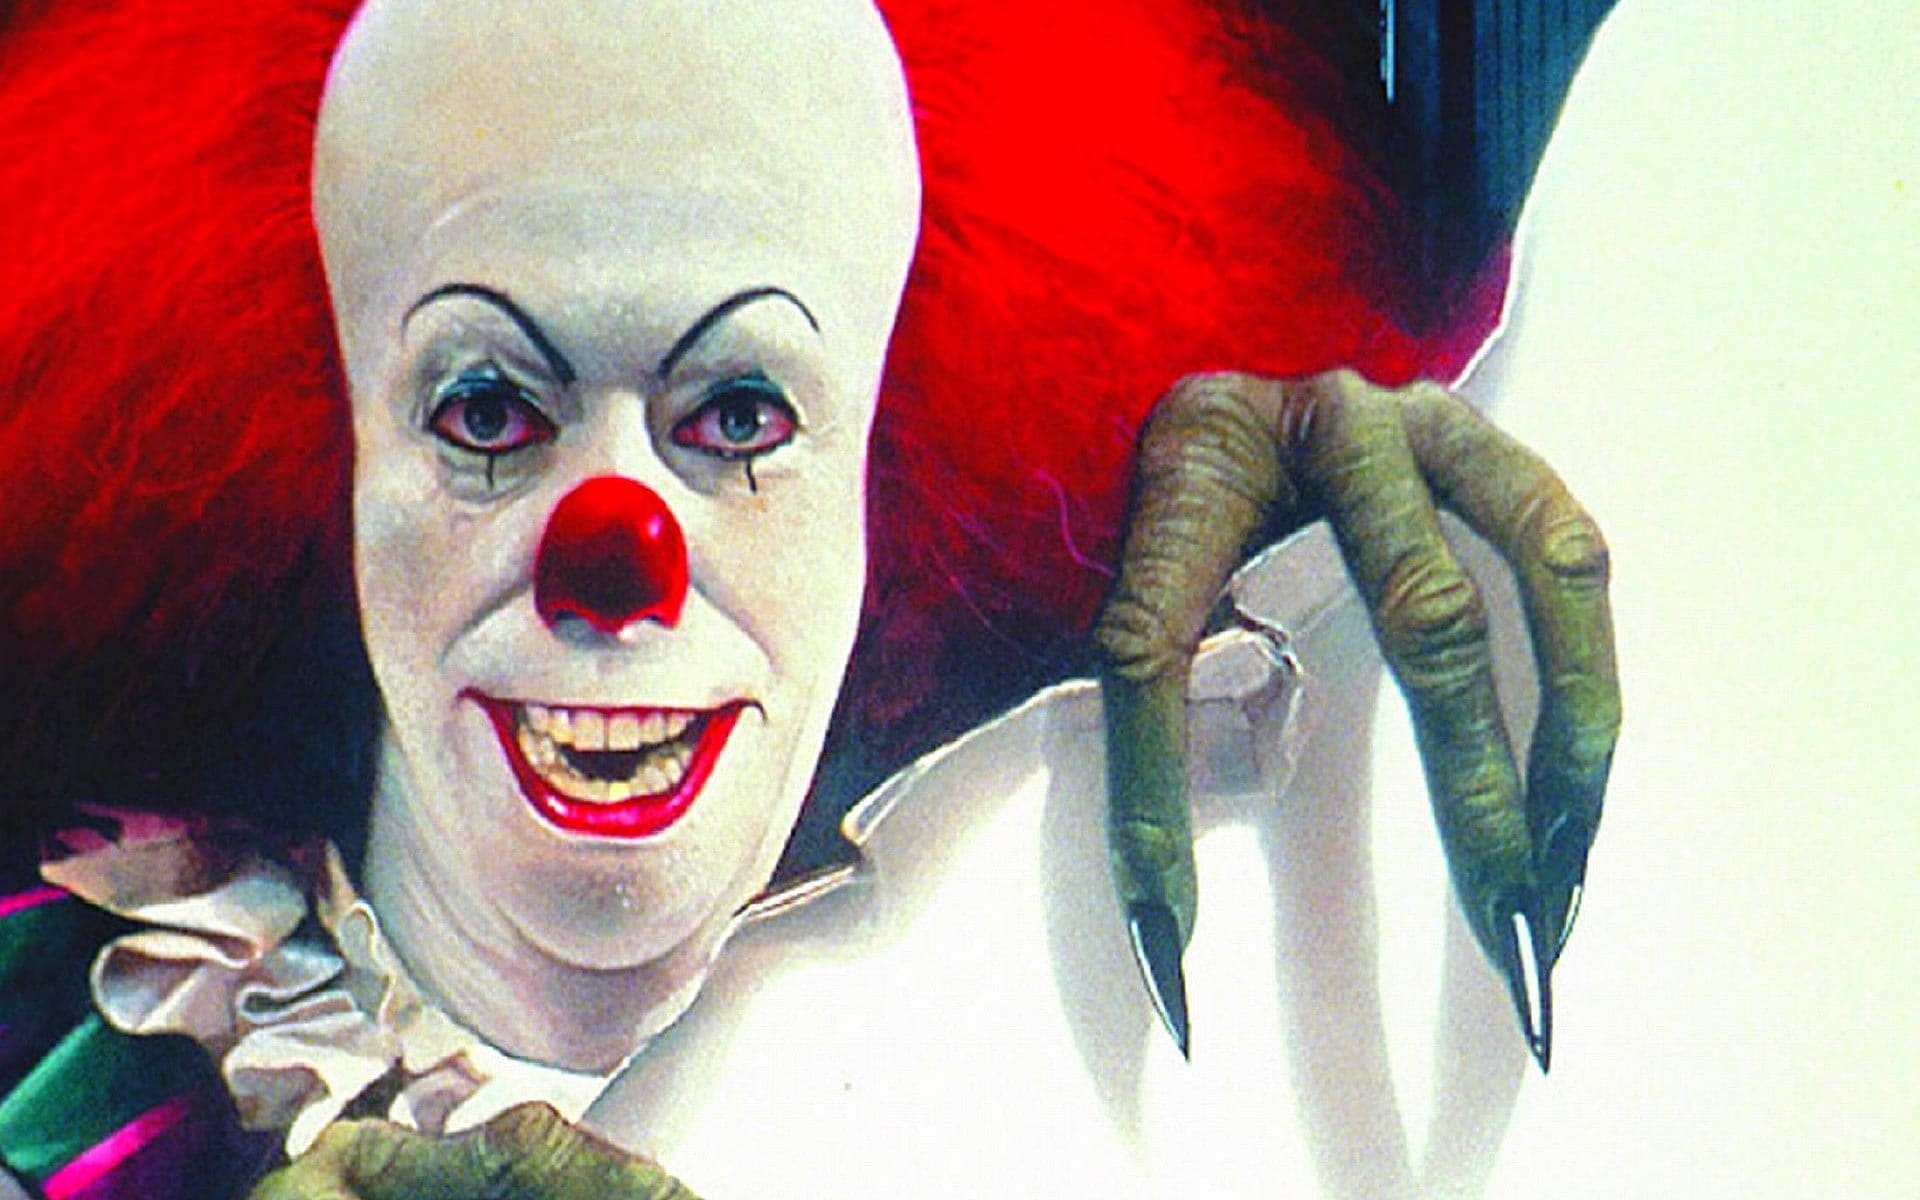 Tim Curry was a delight, the giant spider was a nightmare': the makers of Stephen King's It miniseries tell all